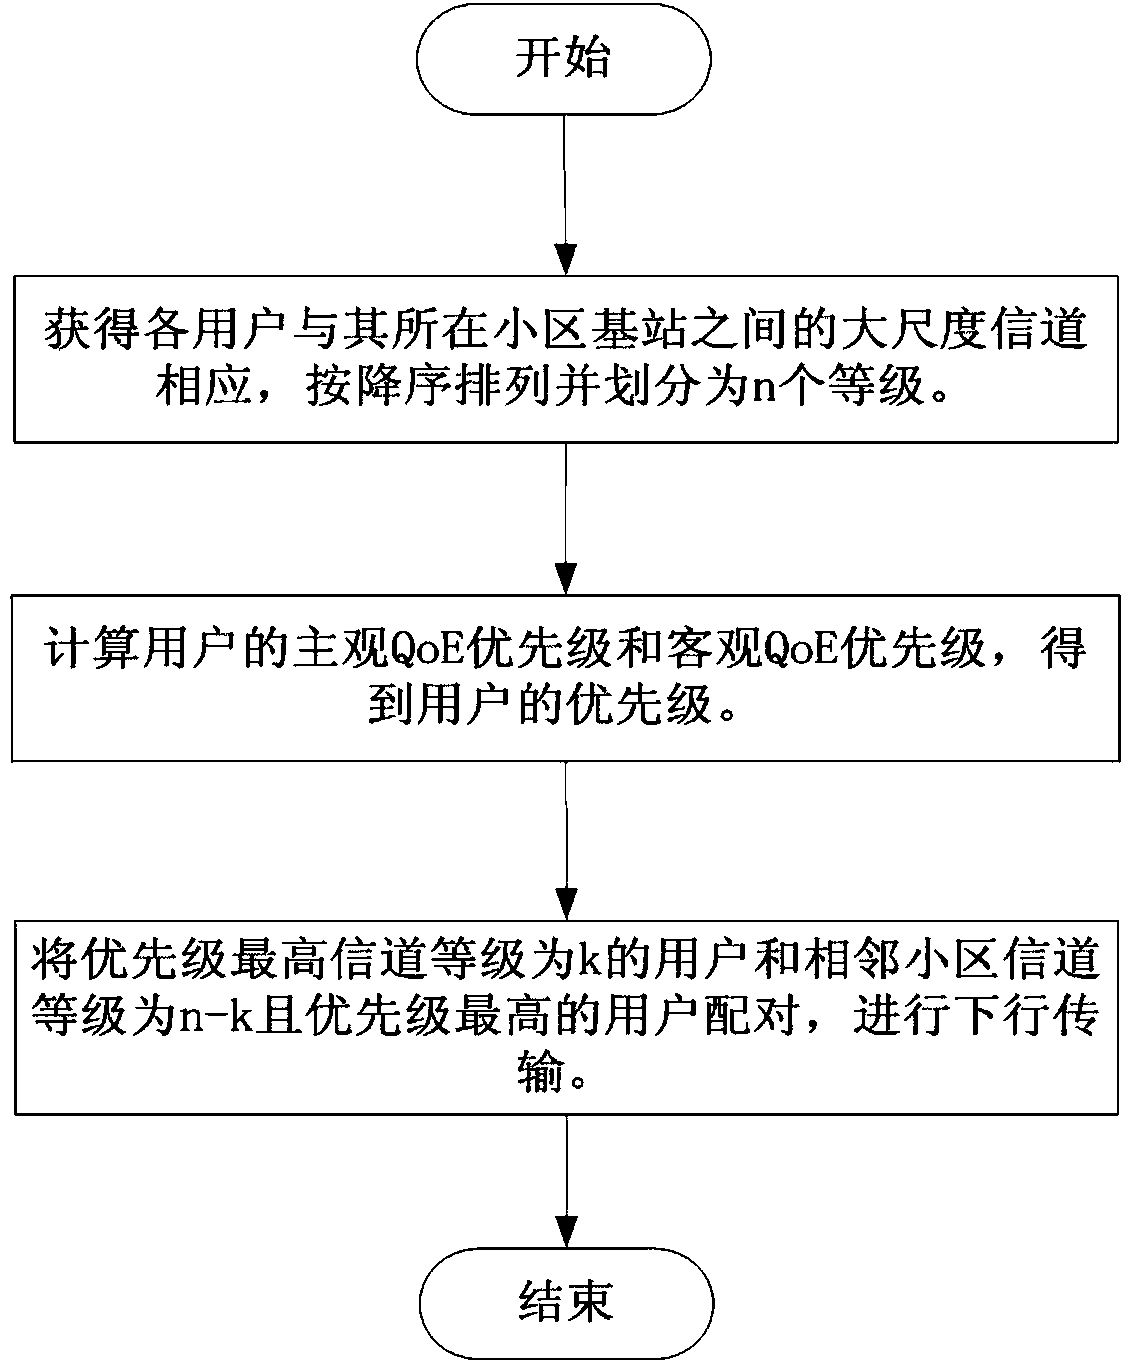 CoMP (coordinated multiple point transmission/reception) multi-user scheduling method based on QoE (quality of experience)